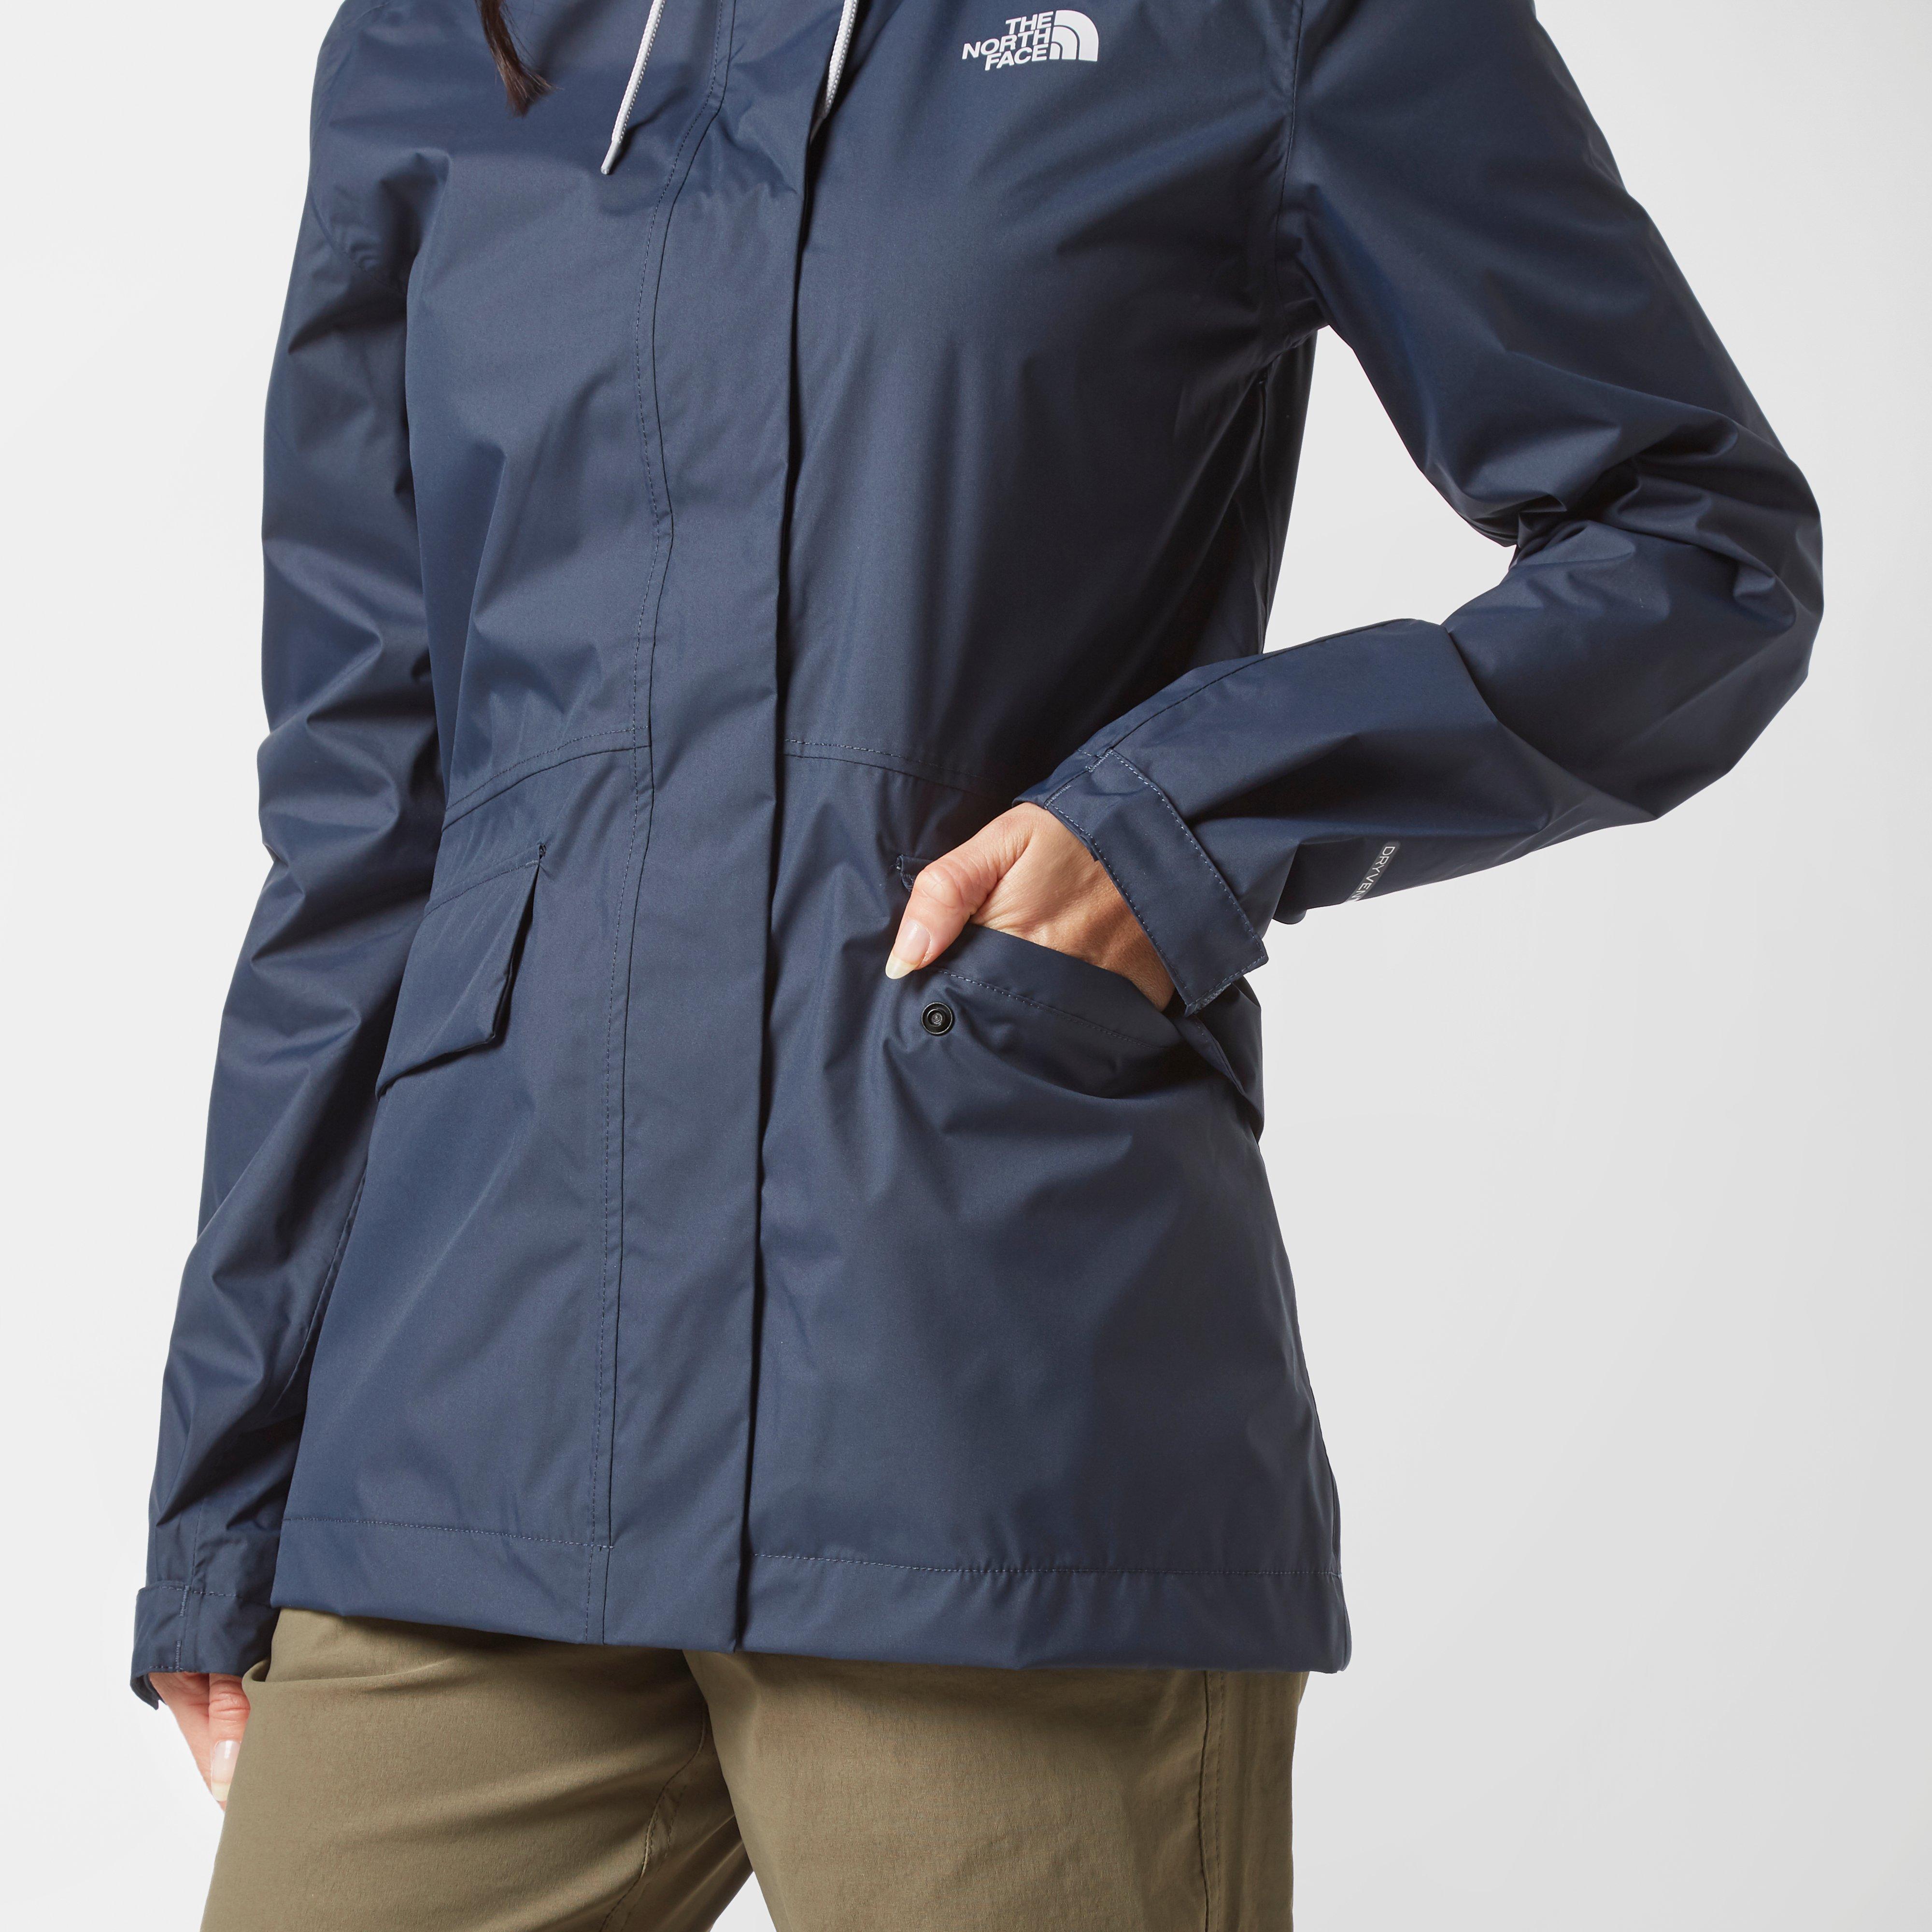 north face exhale insulated jacket